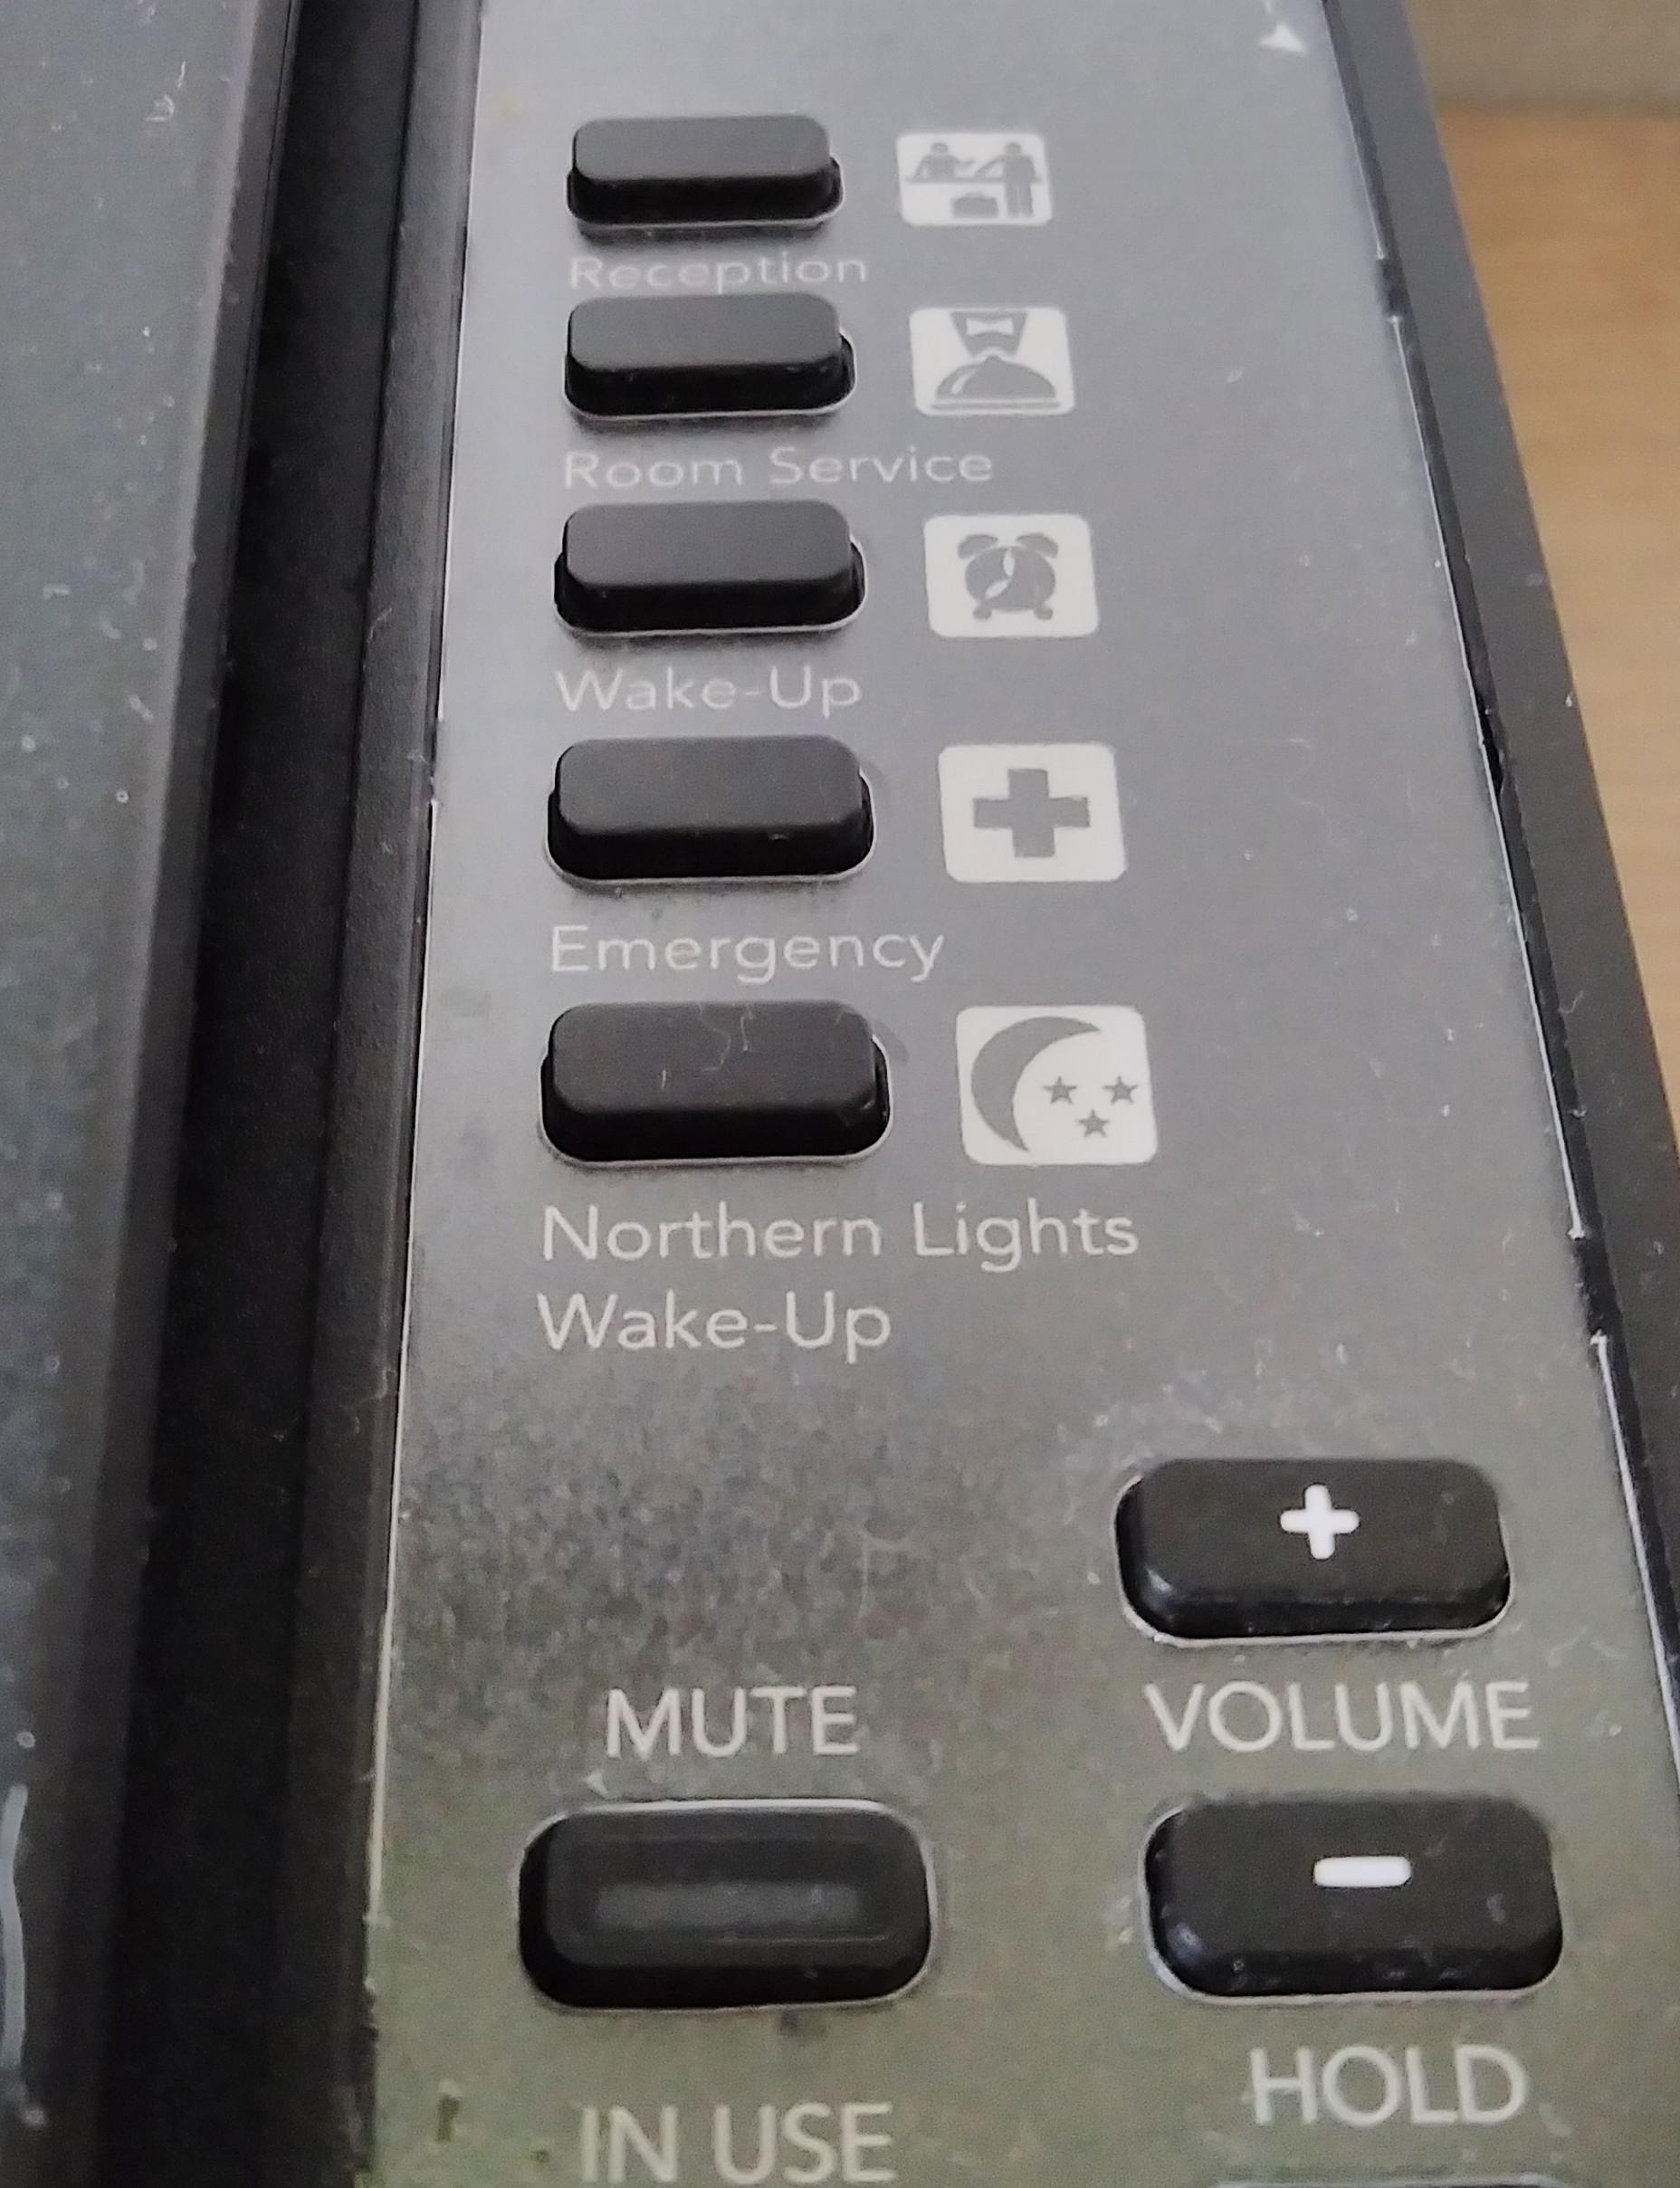 remote control from Iceland that has a "northern lights" button.